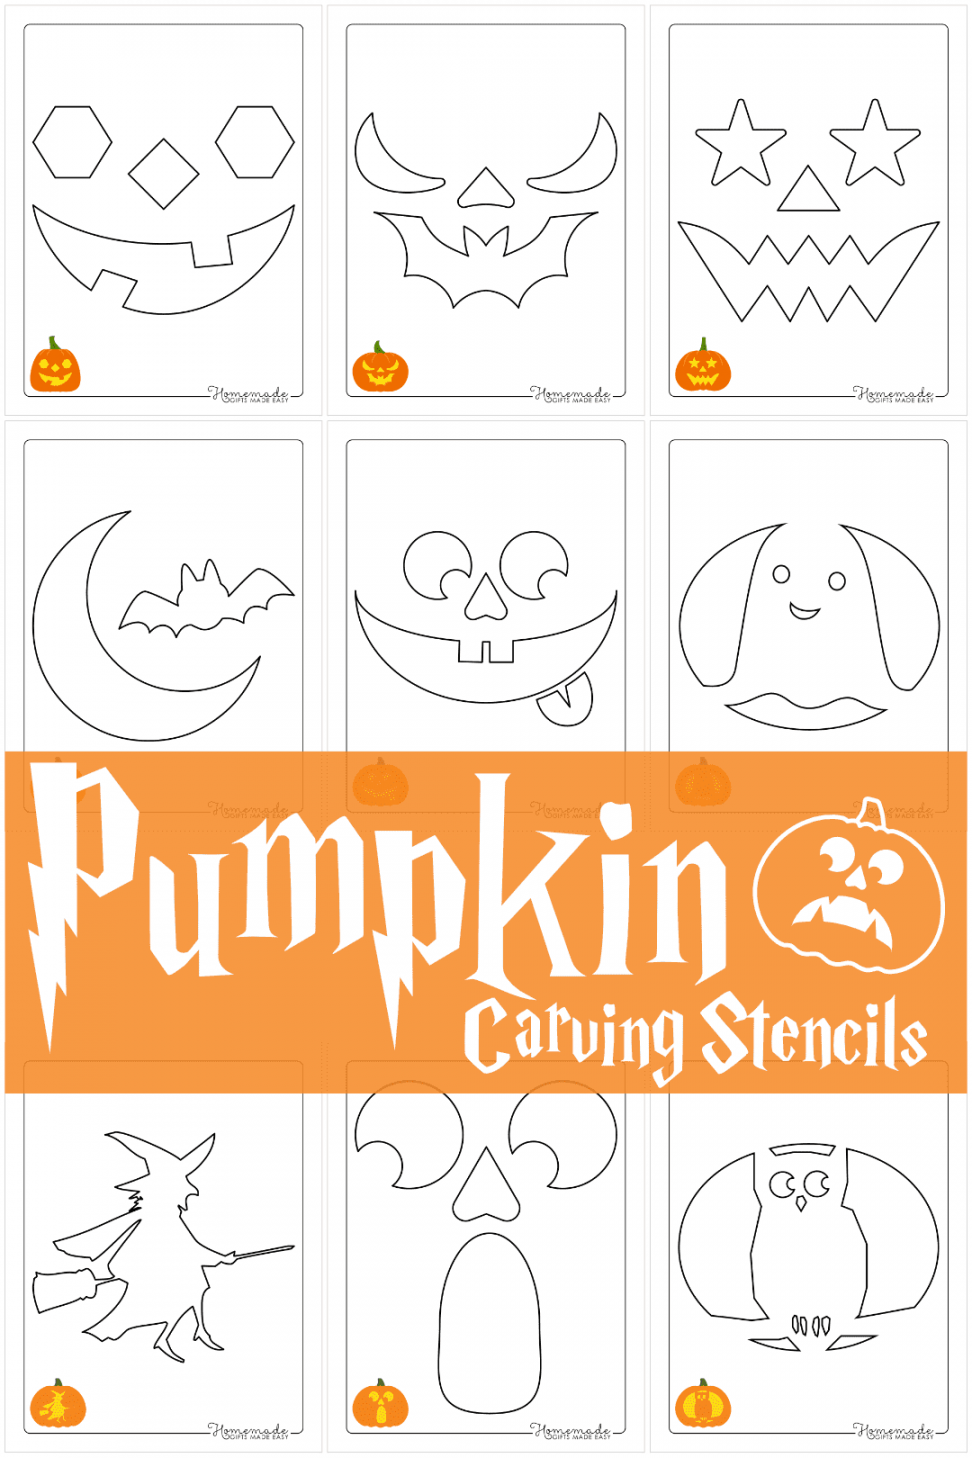 Free Printable Pumpkin Carving Stencils for Halloween - FREE Printables - Pumpkin Pattern Printables